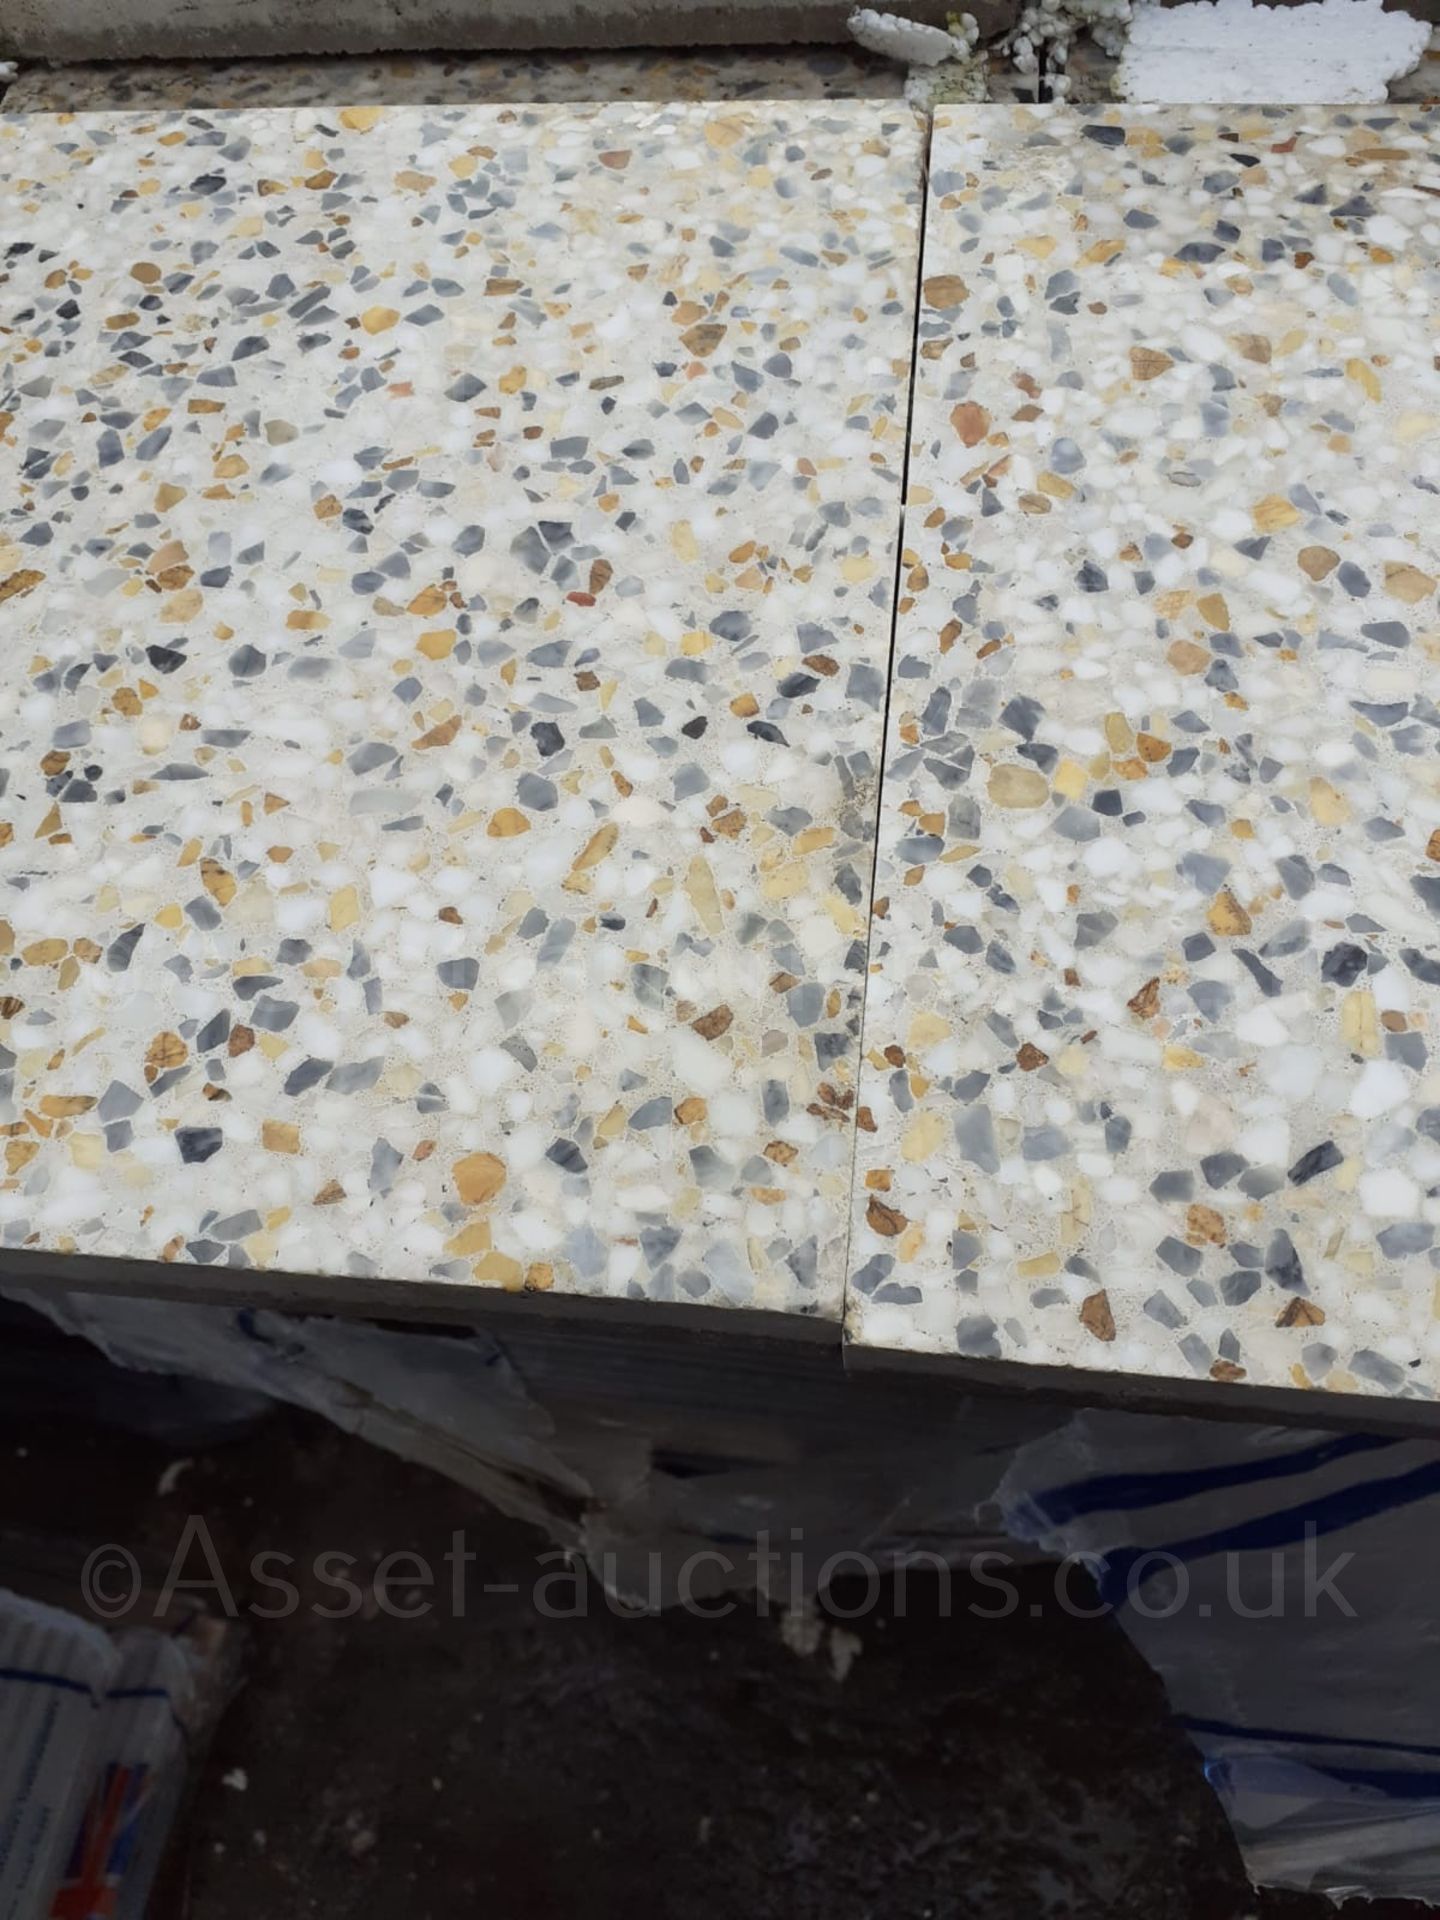 1 PALLET OF BRAND NEW TERRAZZO COMMERCIAL FLOOR TILES (TDE9), COVERS 24 SQUARE YARDS *PLUS VAT* - Image 2 of 3